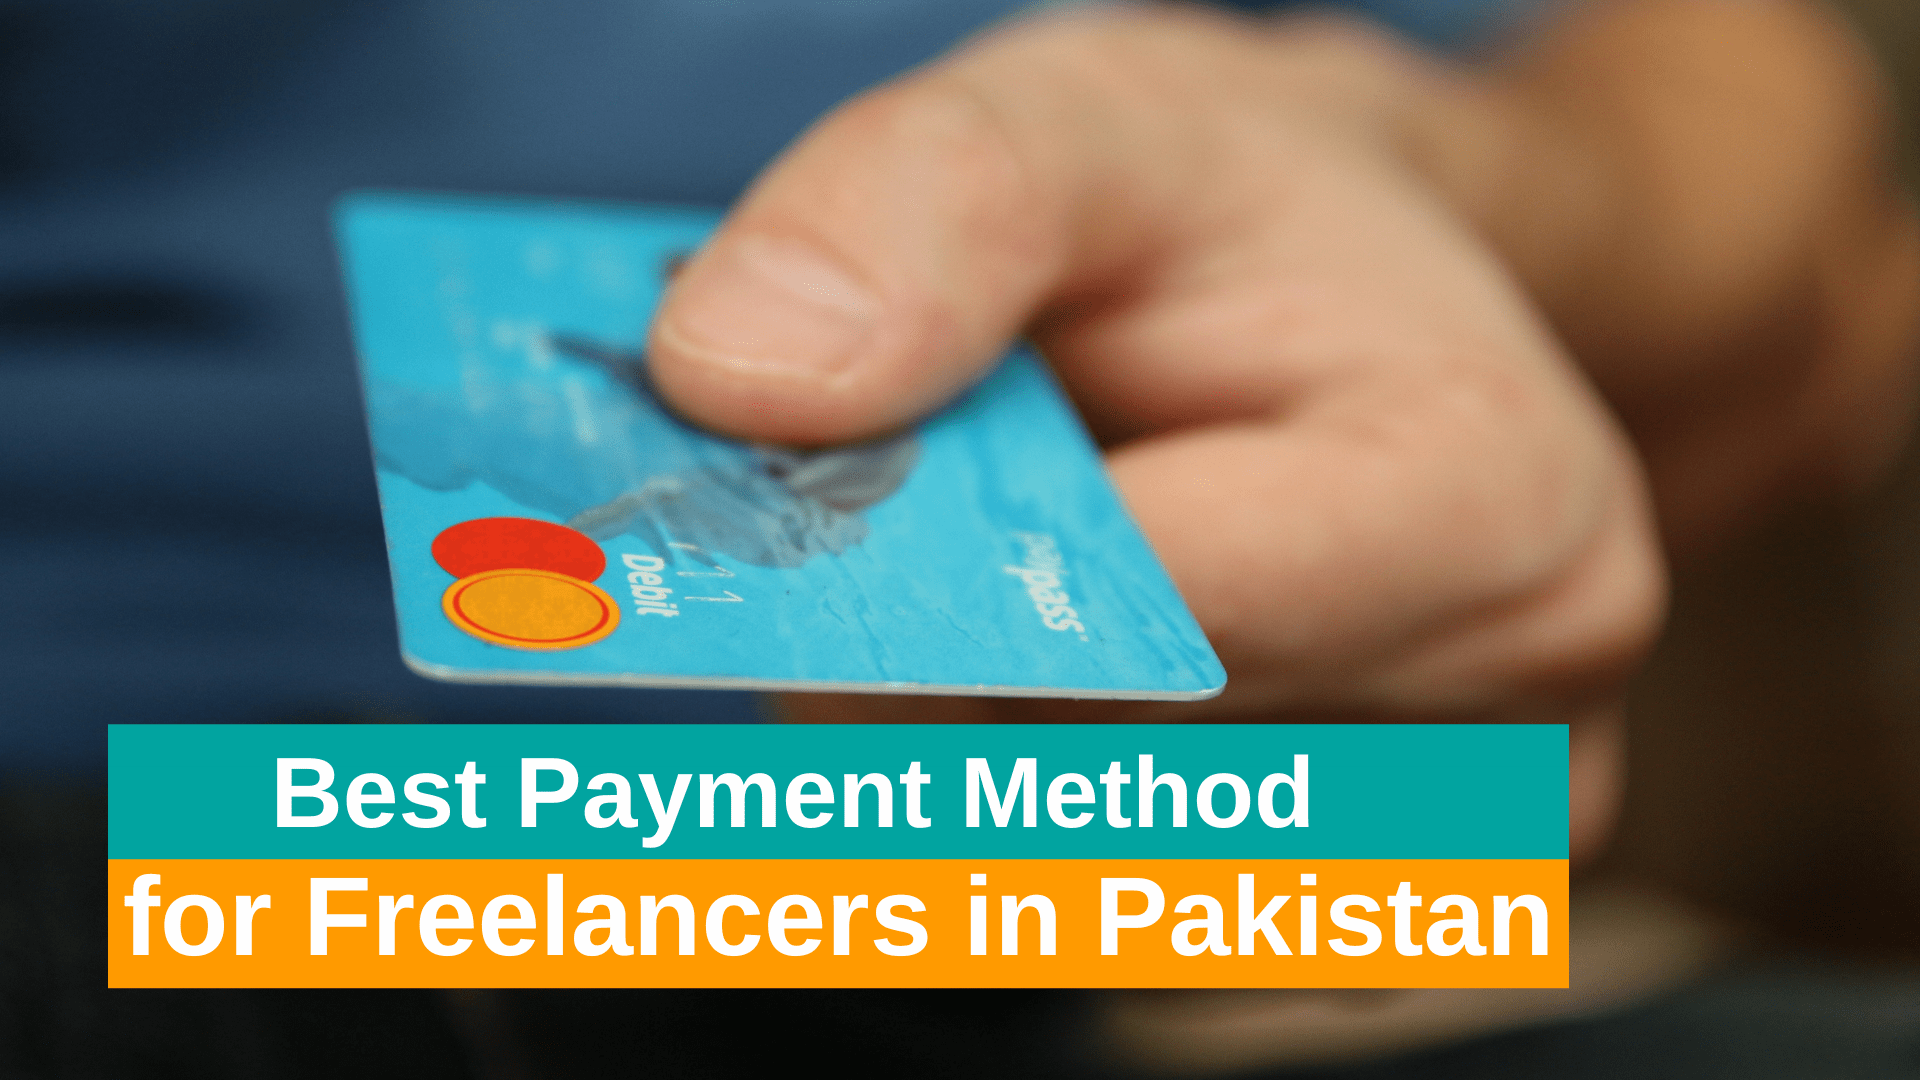 Best Payment Method for Freelancers in Pakistan